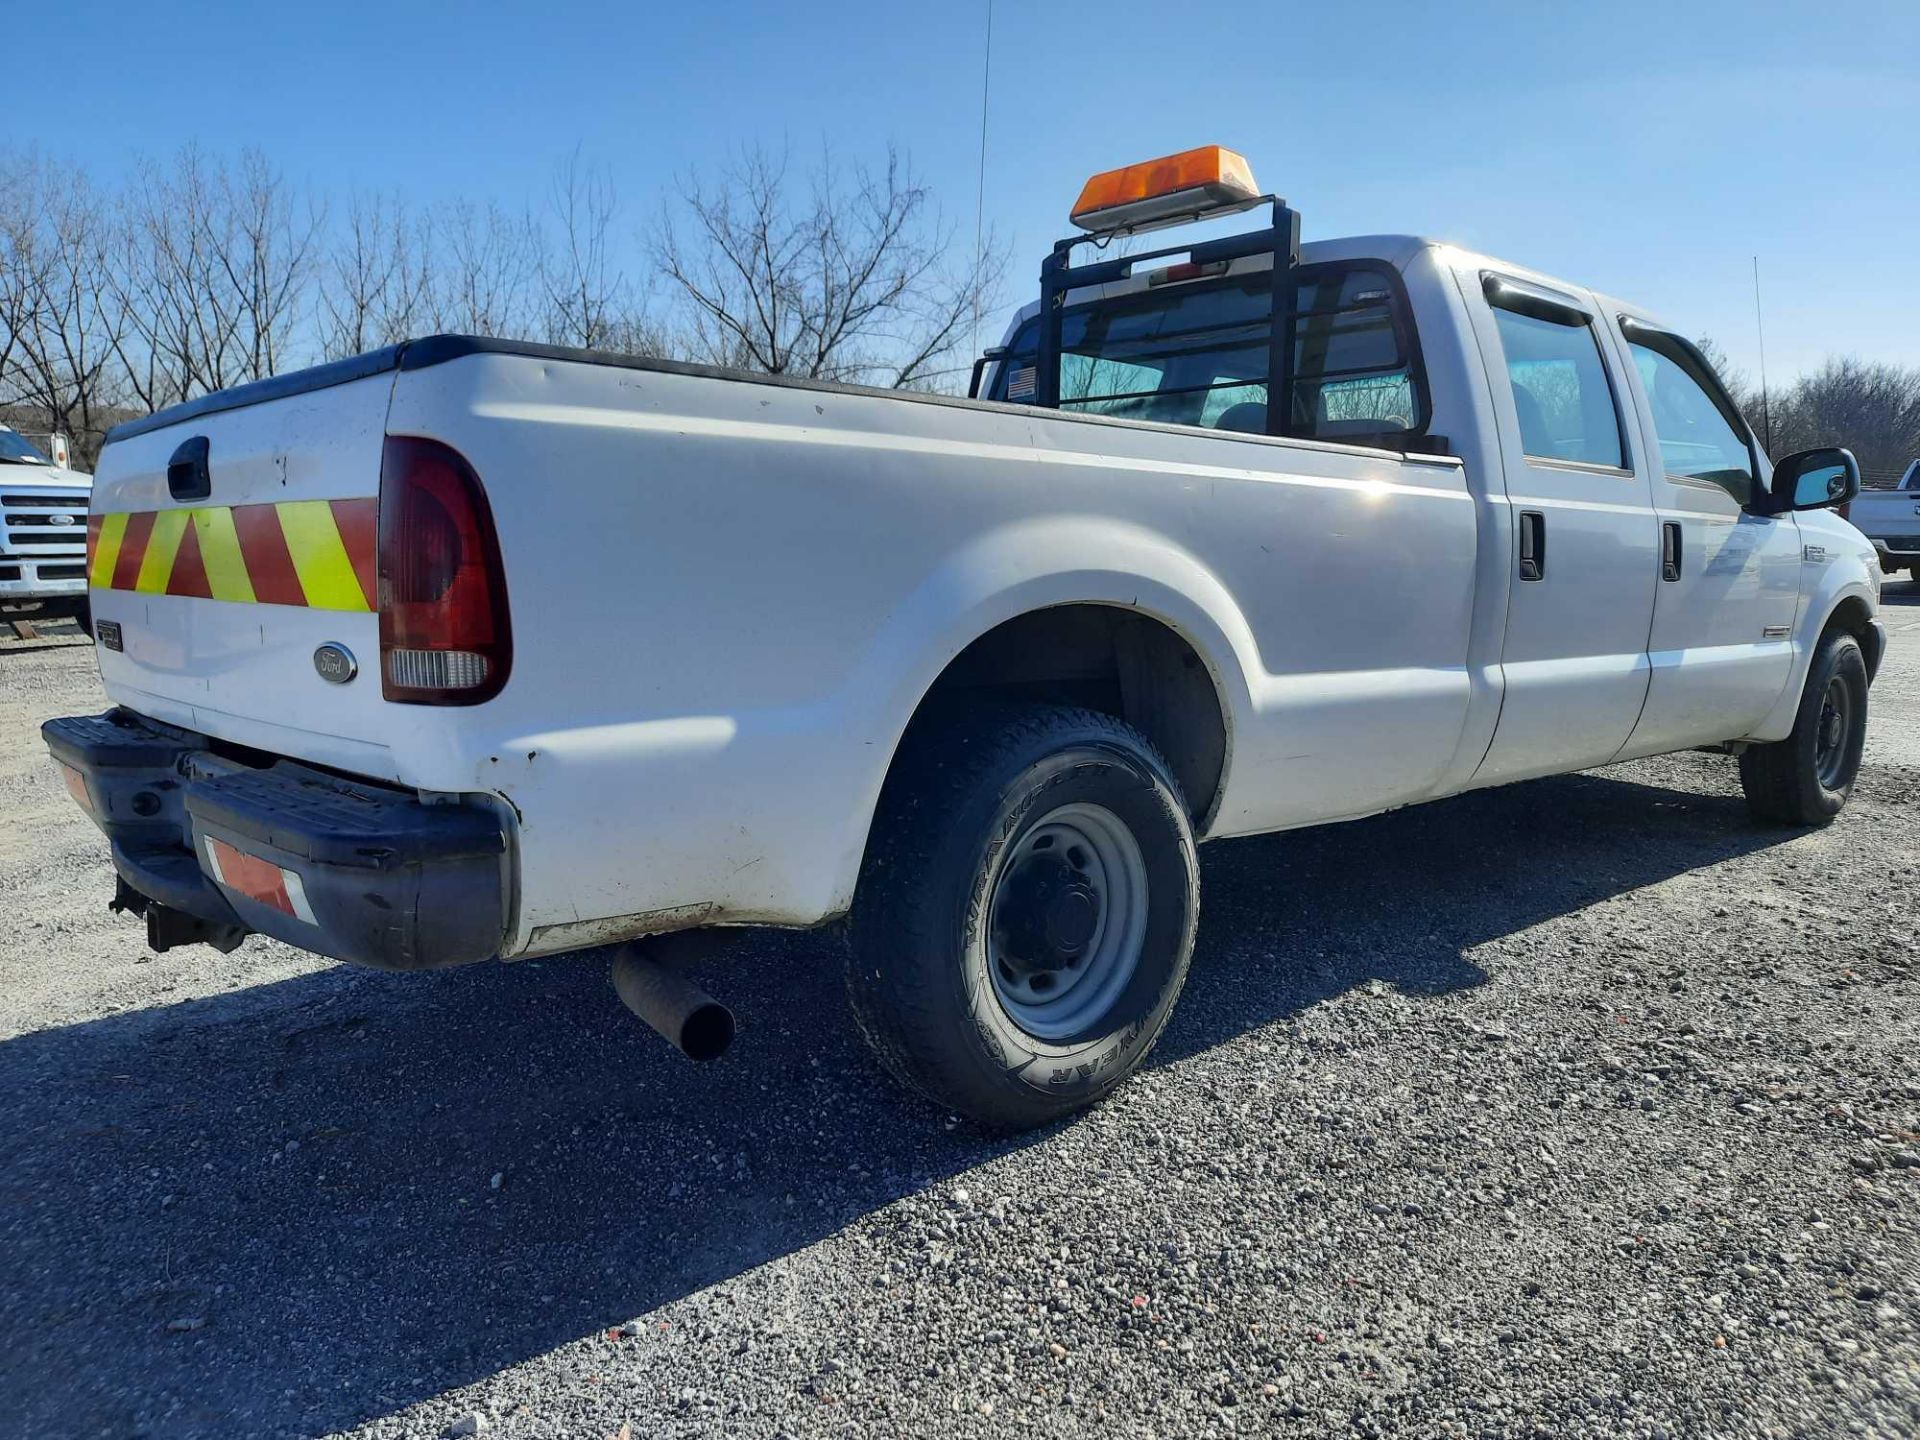 2003 FORD F350 PICK UP TRUCK (VDOT # R06582) - Image 2 of 15